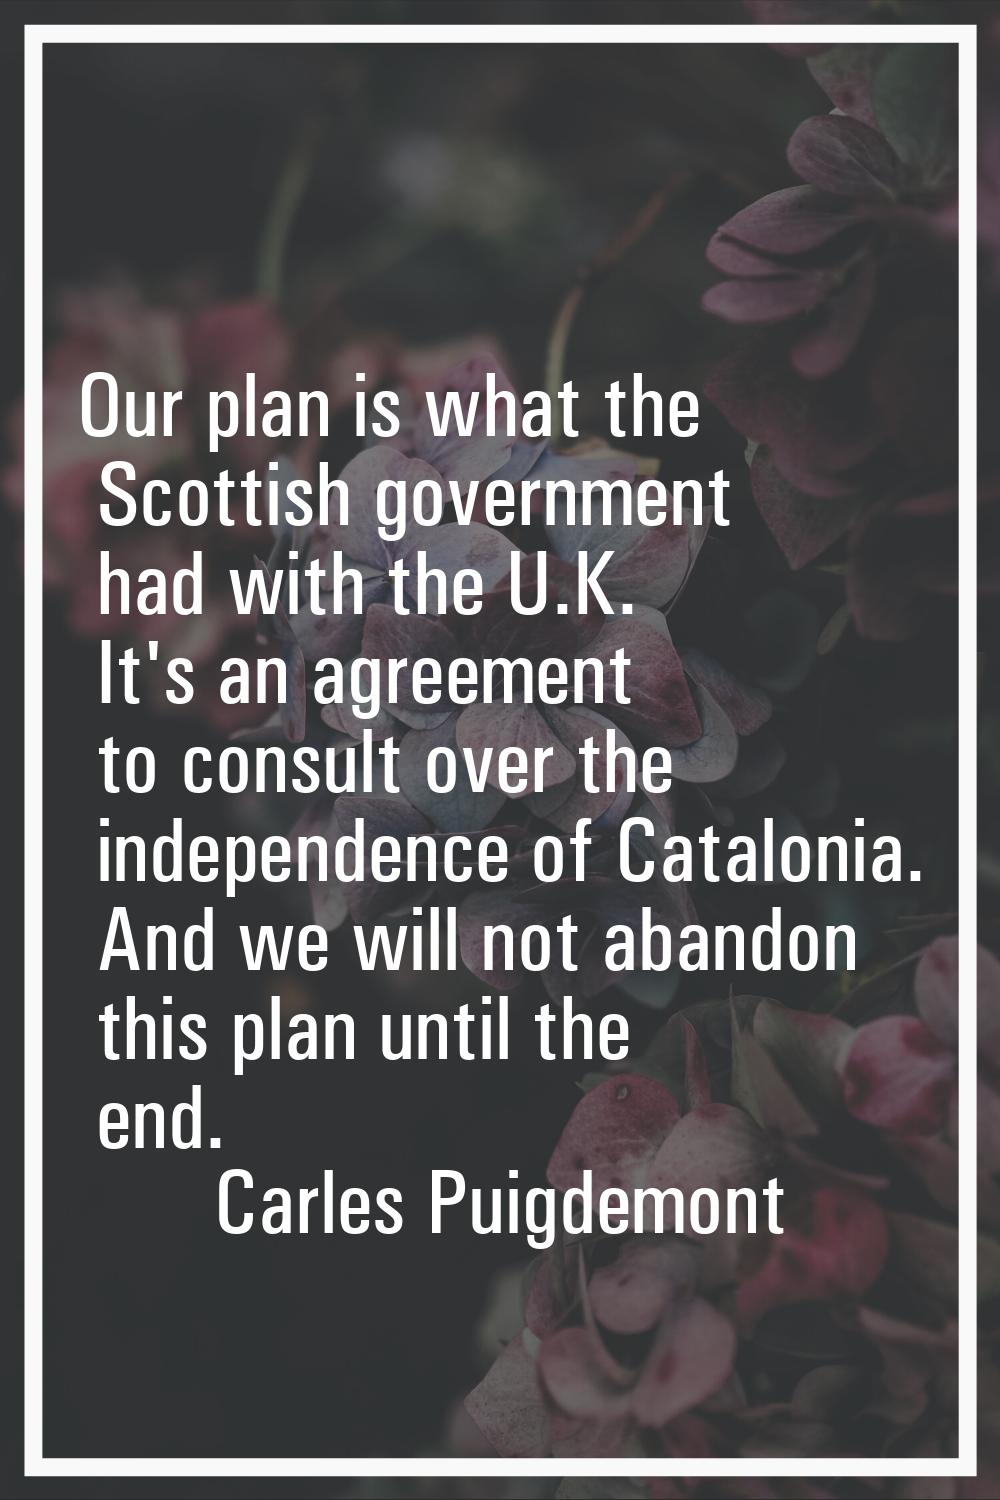 Our plan is what the Scottish government had with the U.K. It's an agreement to consult over the in